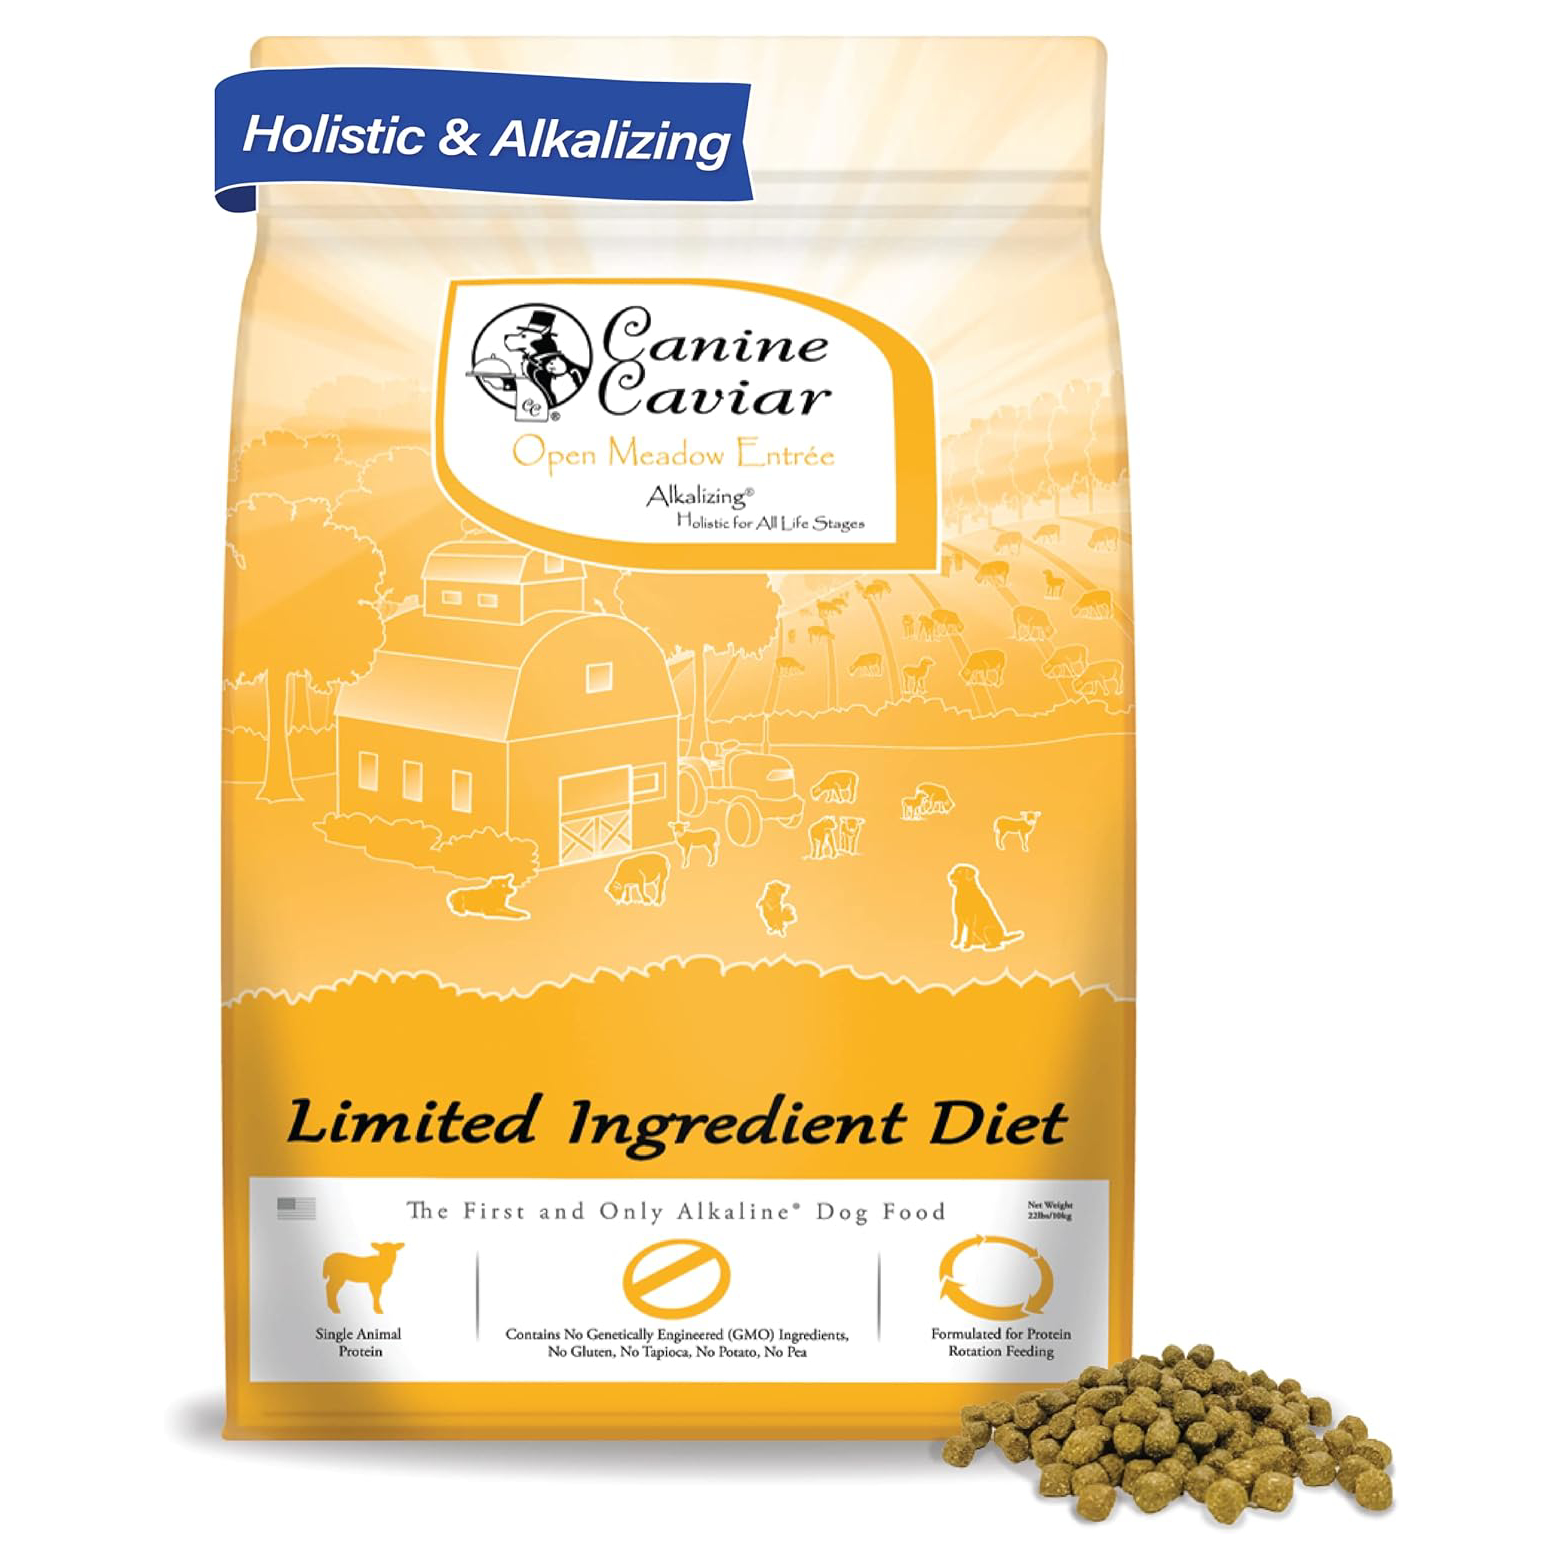 Canine Caviar Limited Ingredient Diet Dog Food